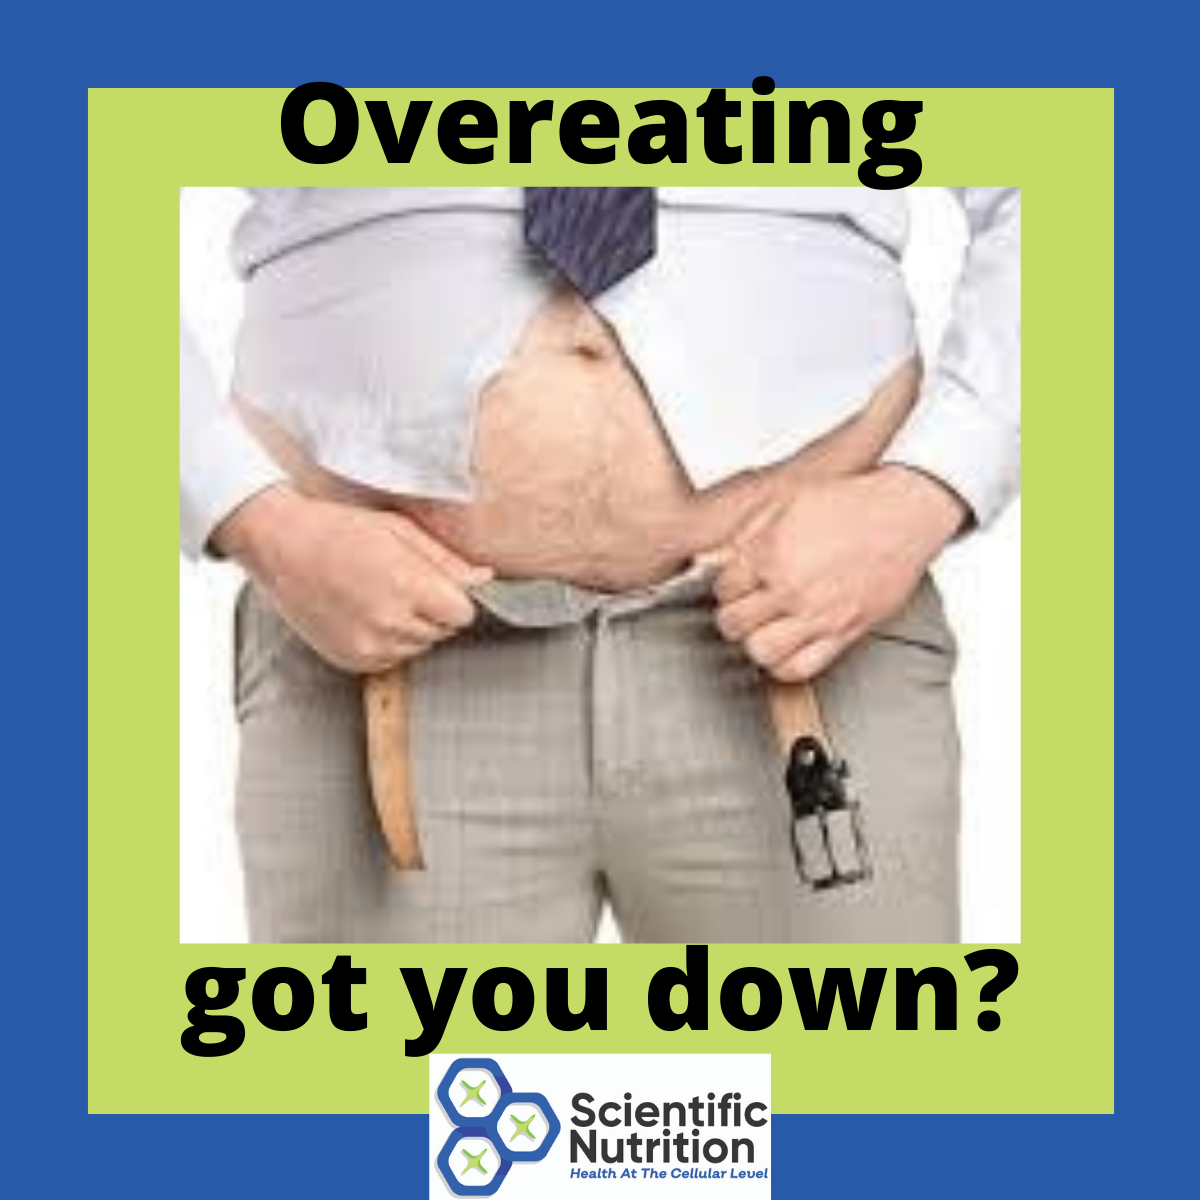 Overeating (1).png